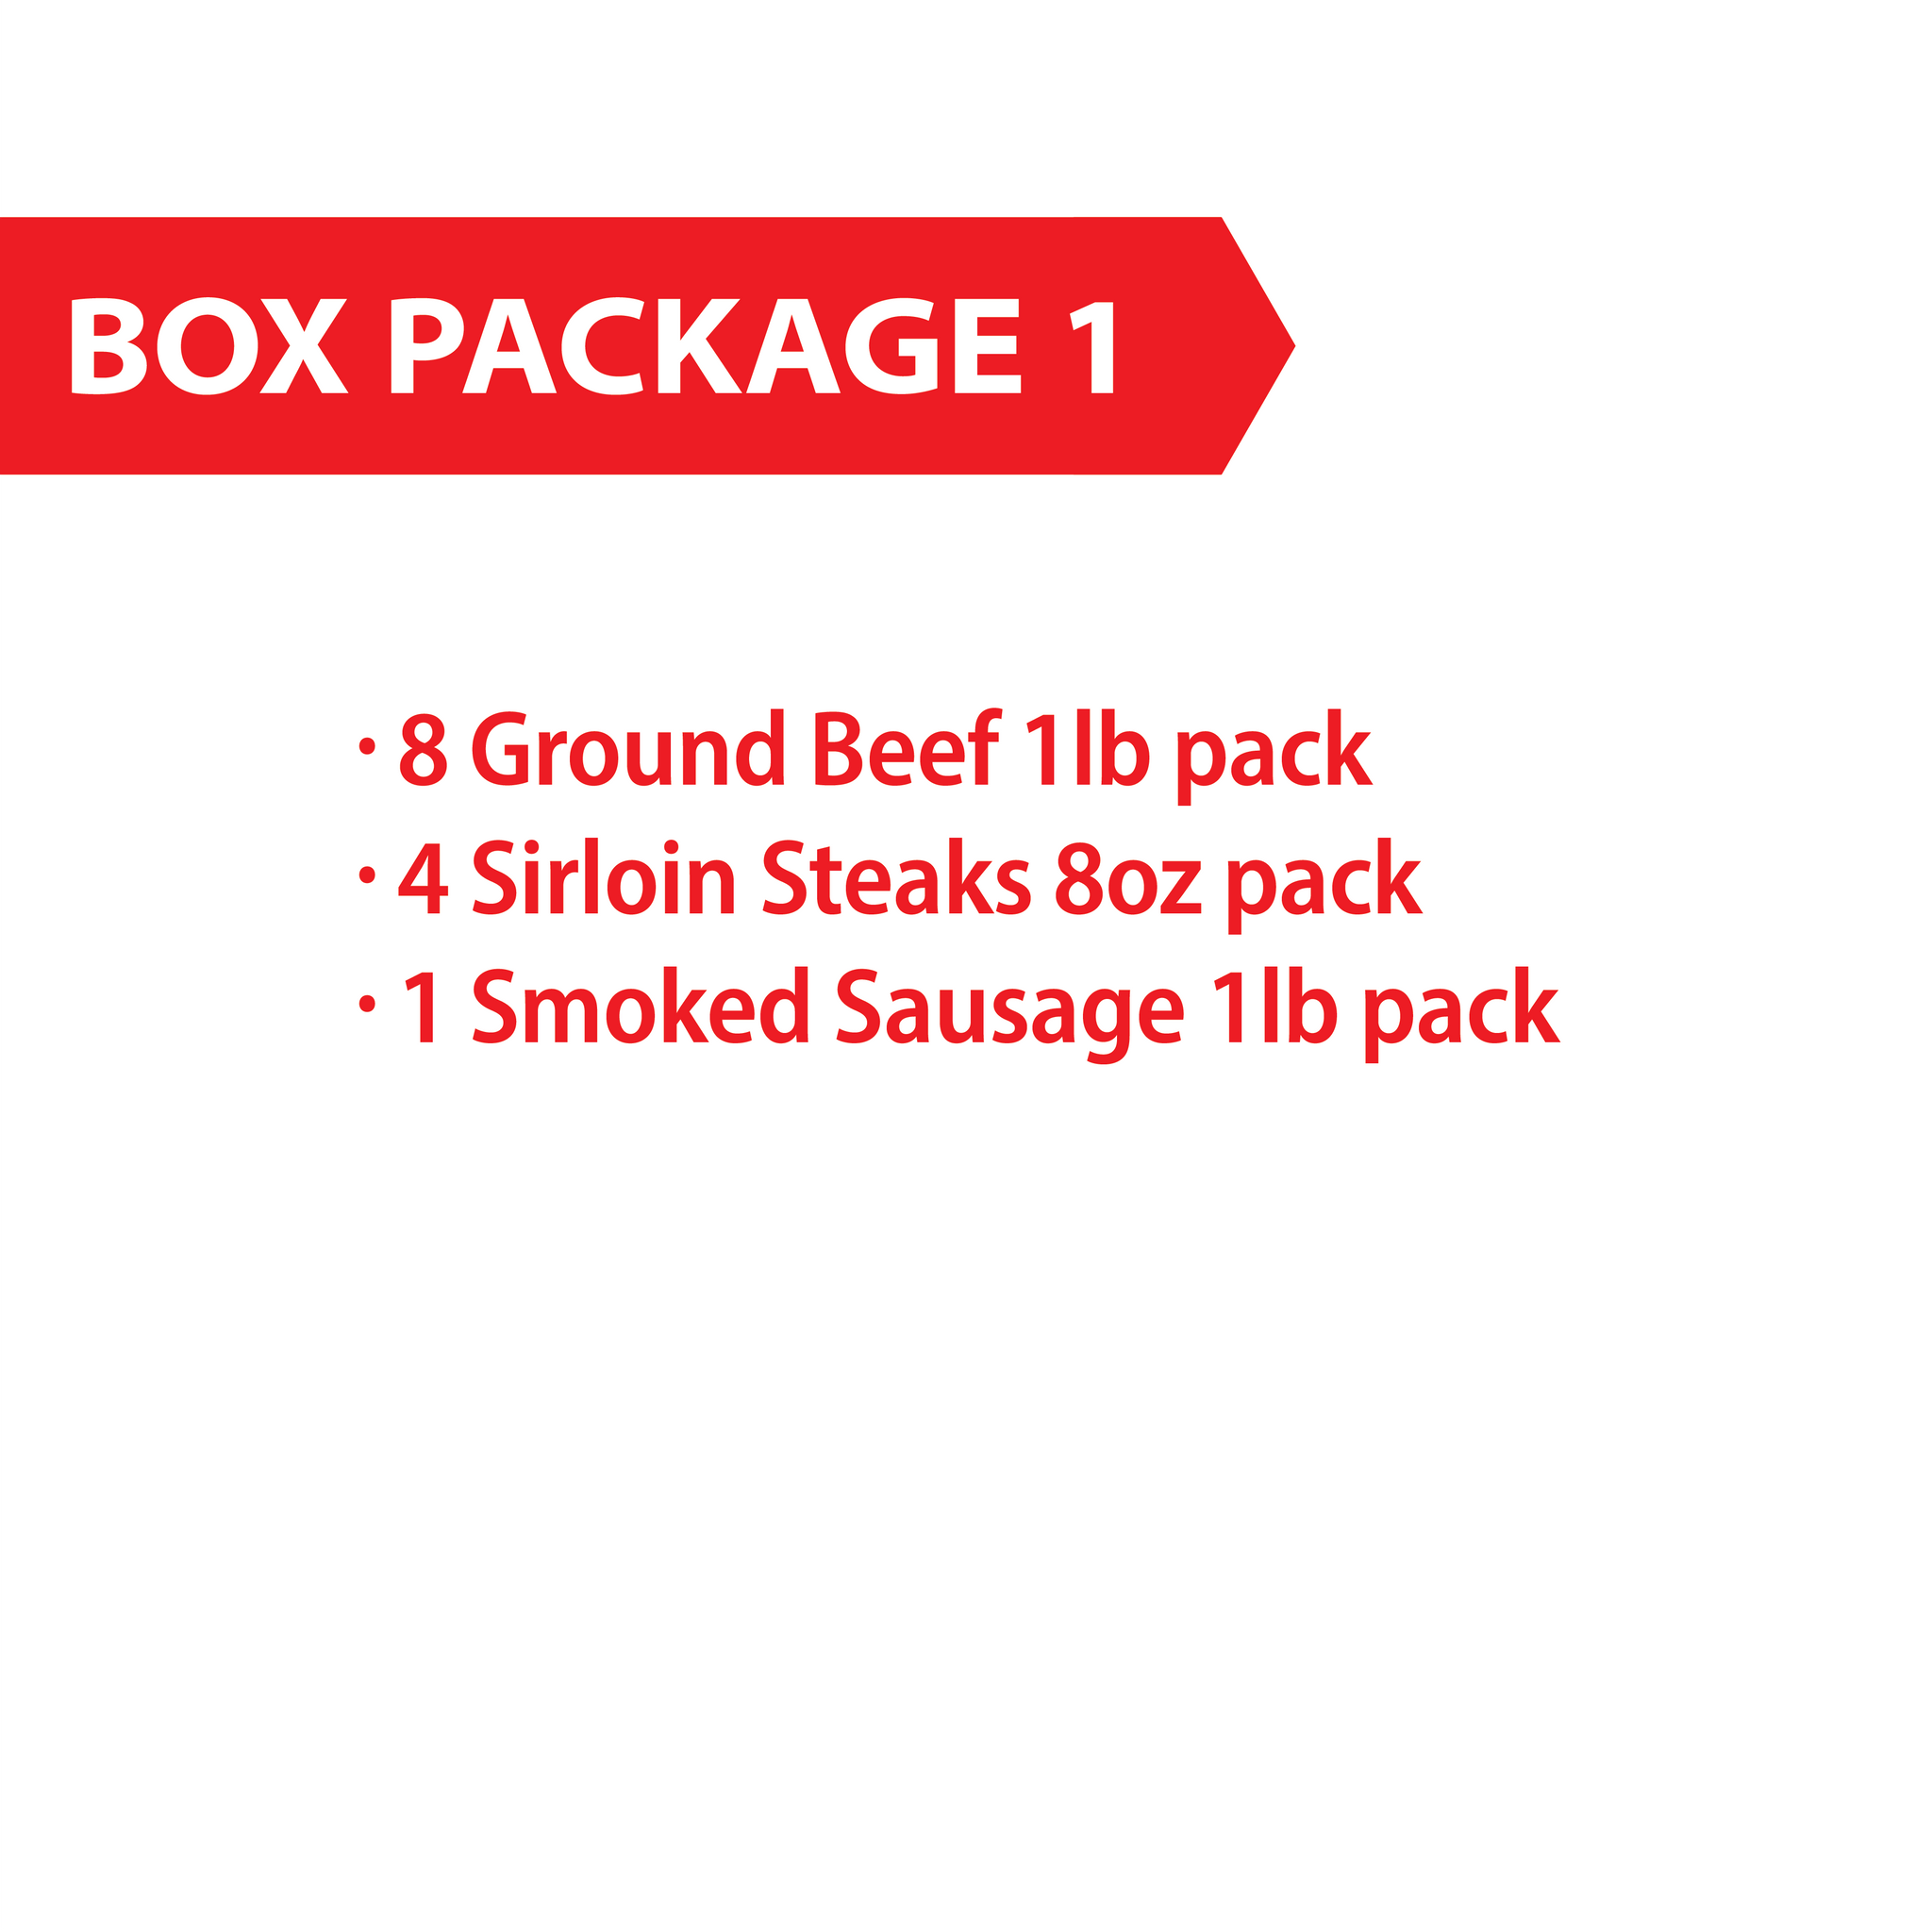 Box Packages